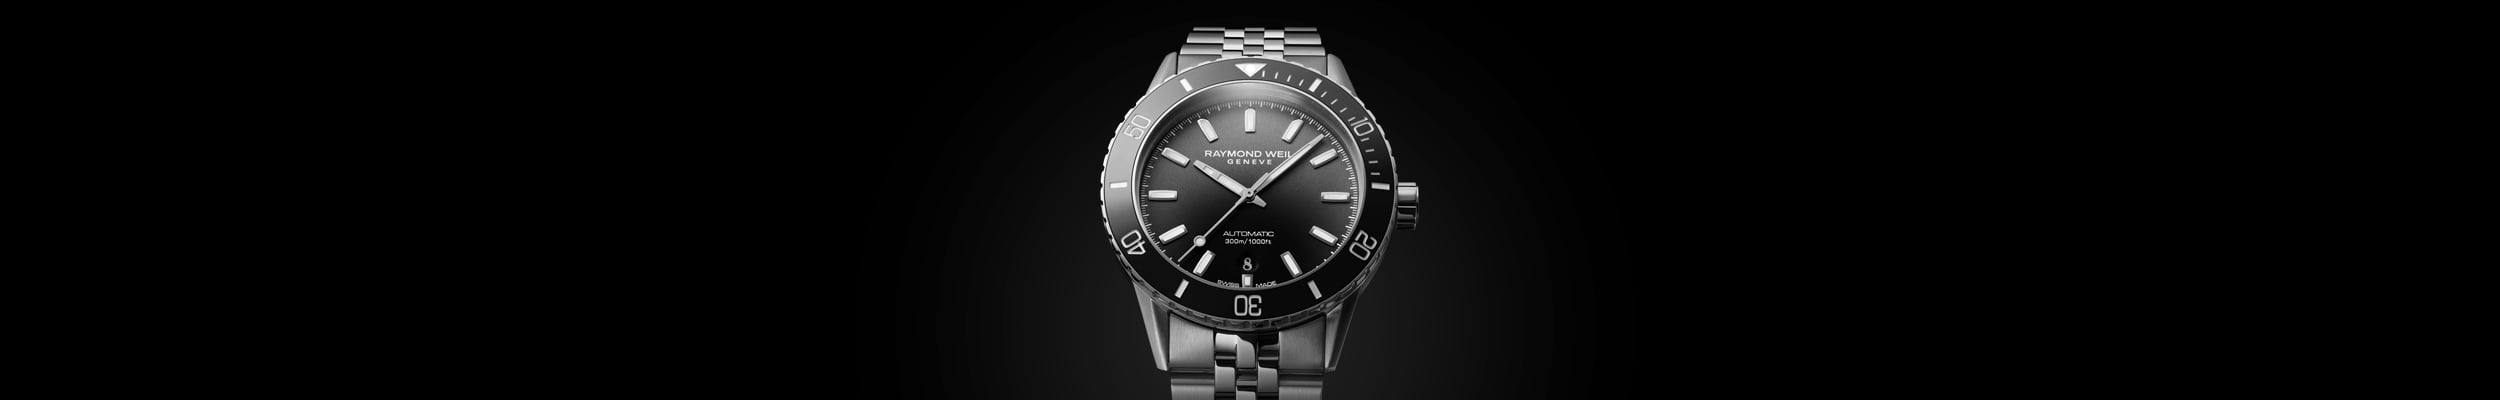 Banner image for Diver Watches page